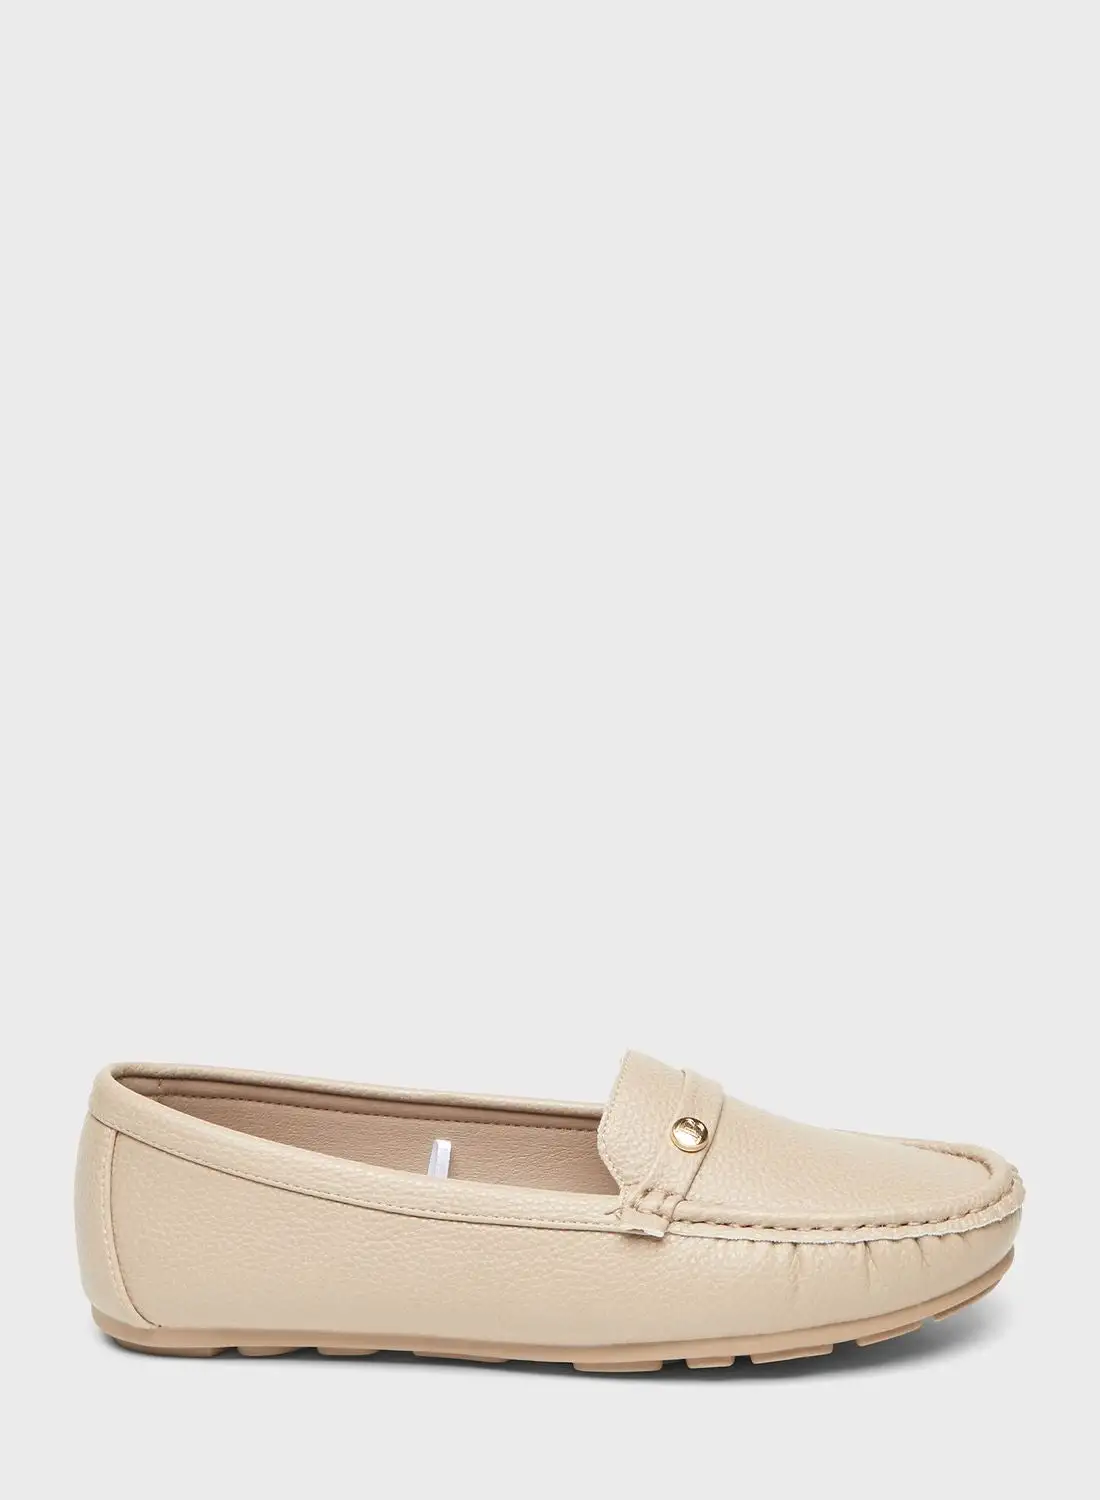 shoexpress Casual Loafers